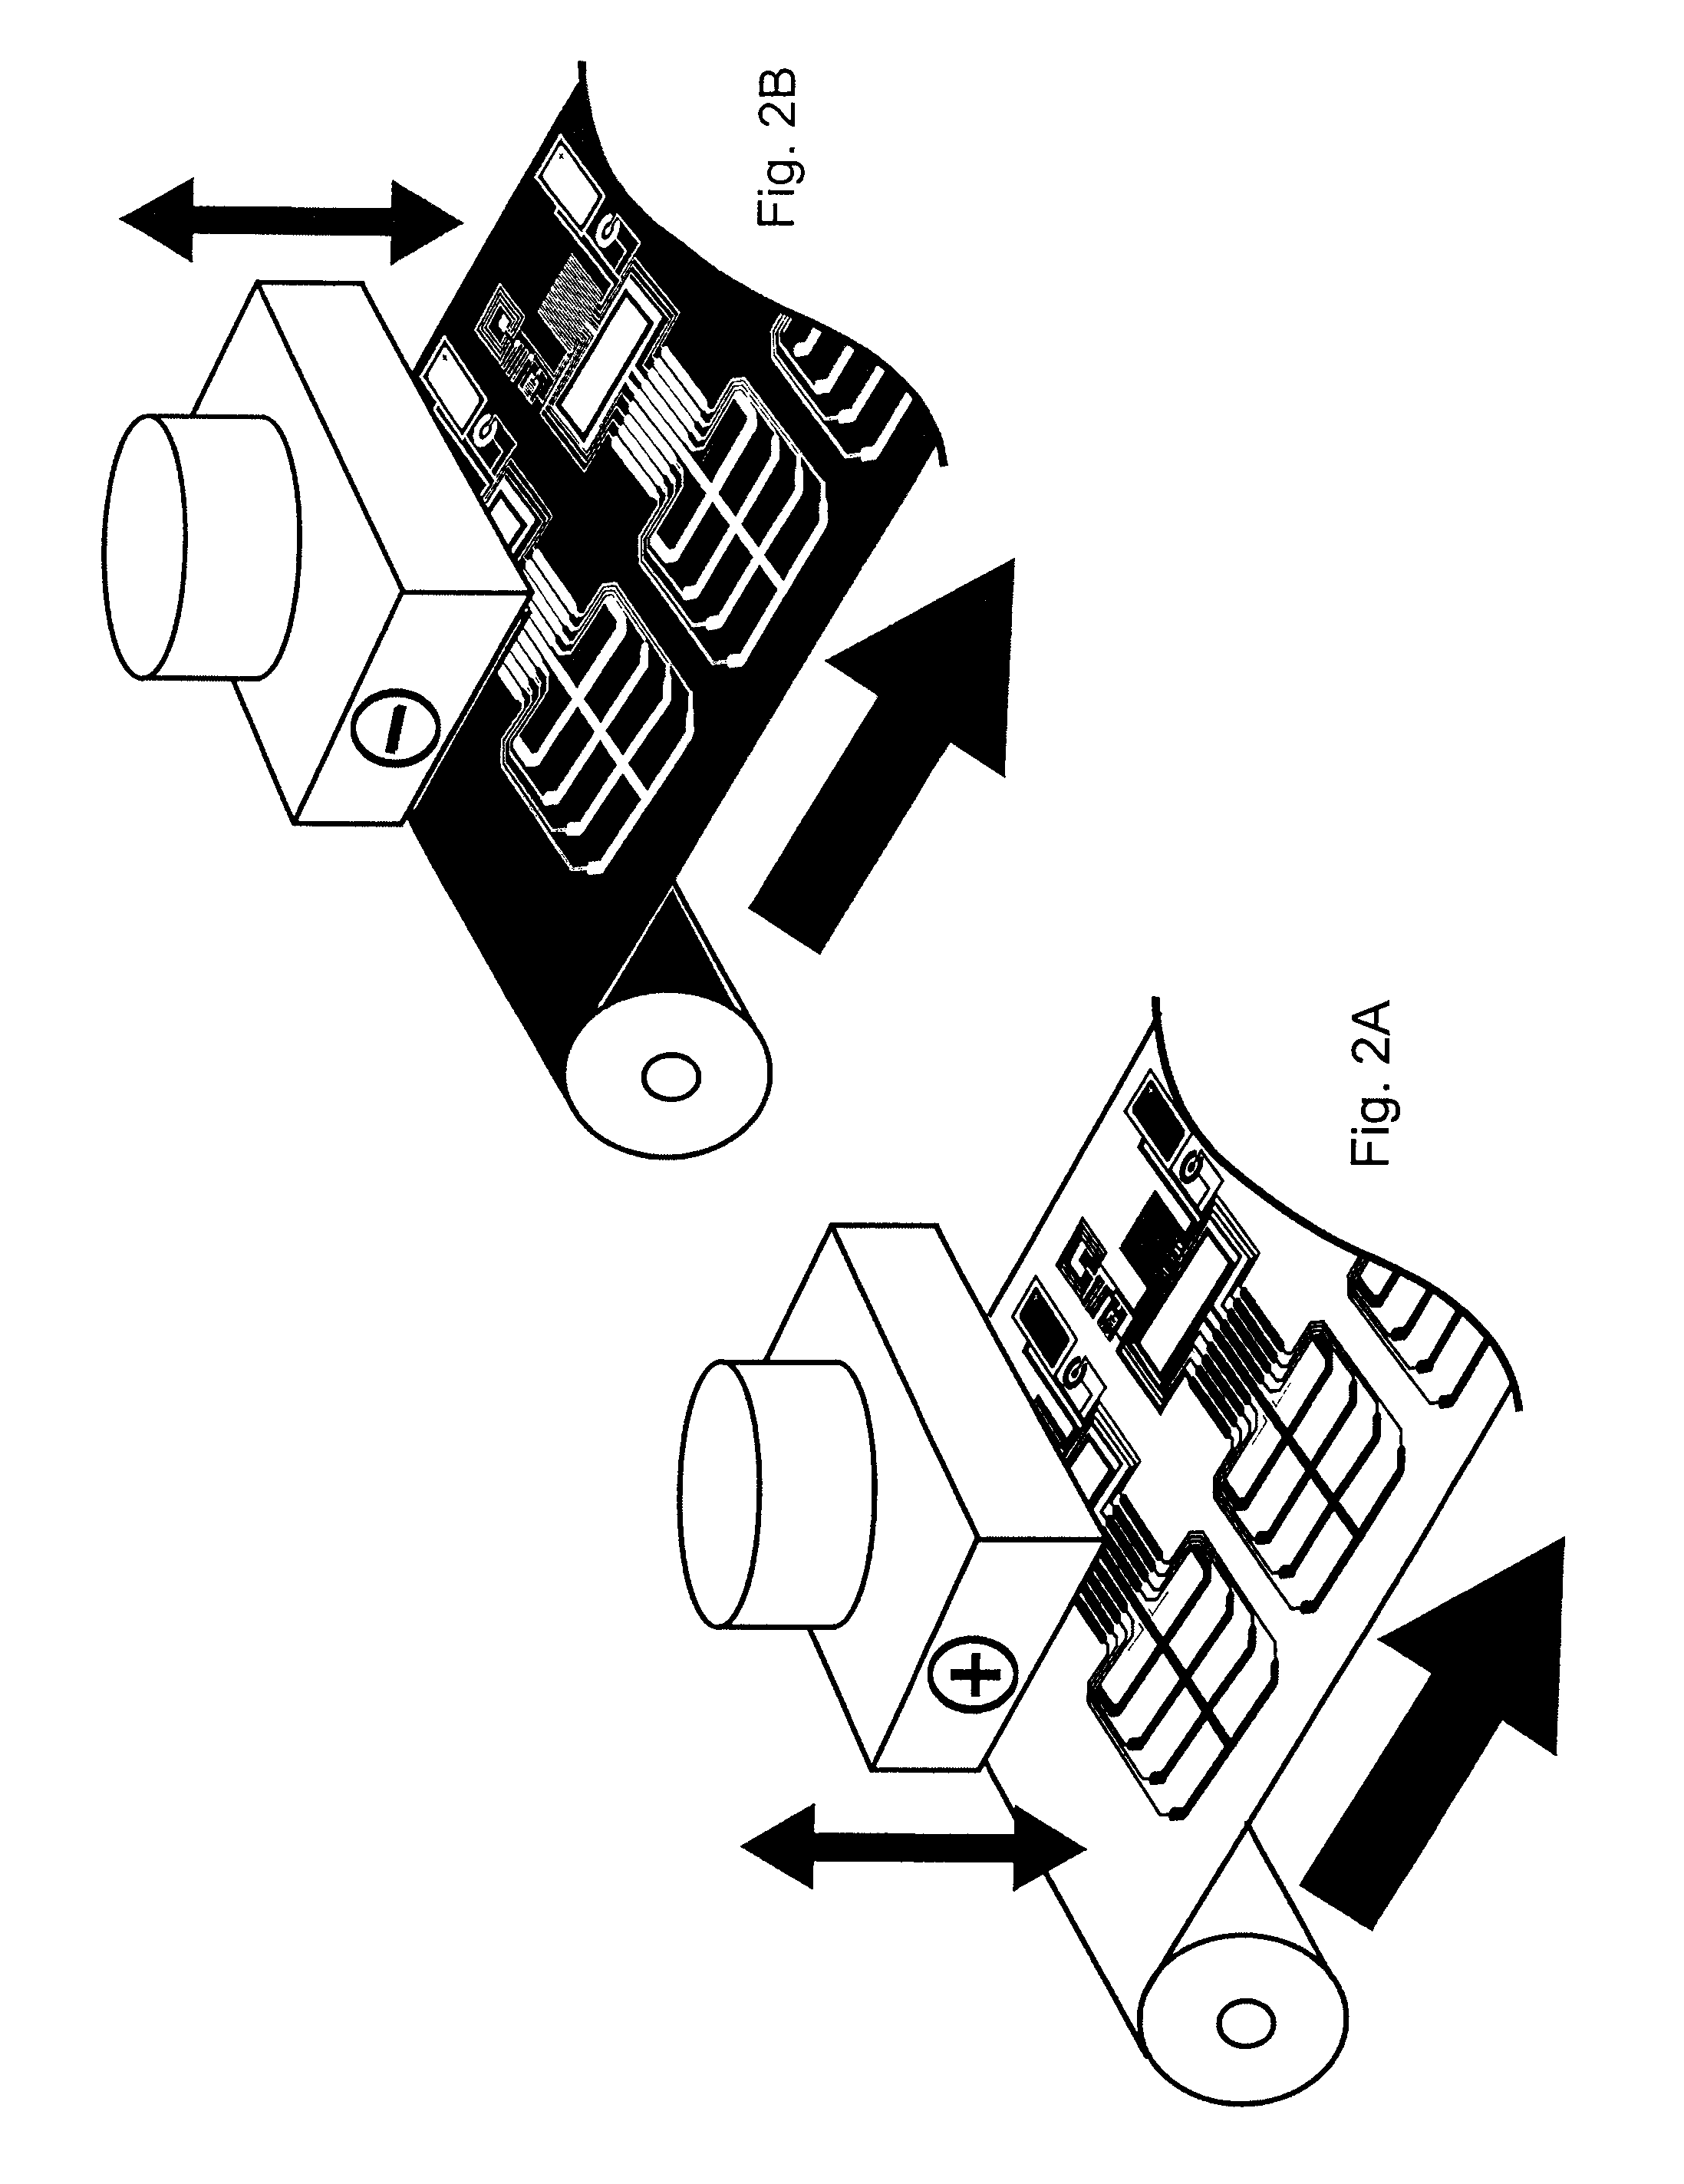 Disposable content use monitoring package with a removable re-usable electronic circuit board